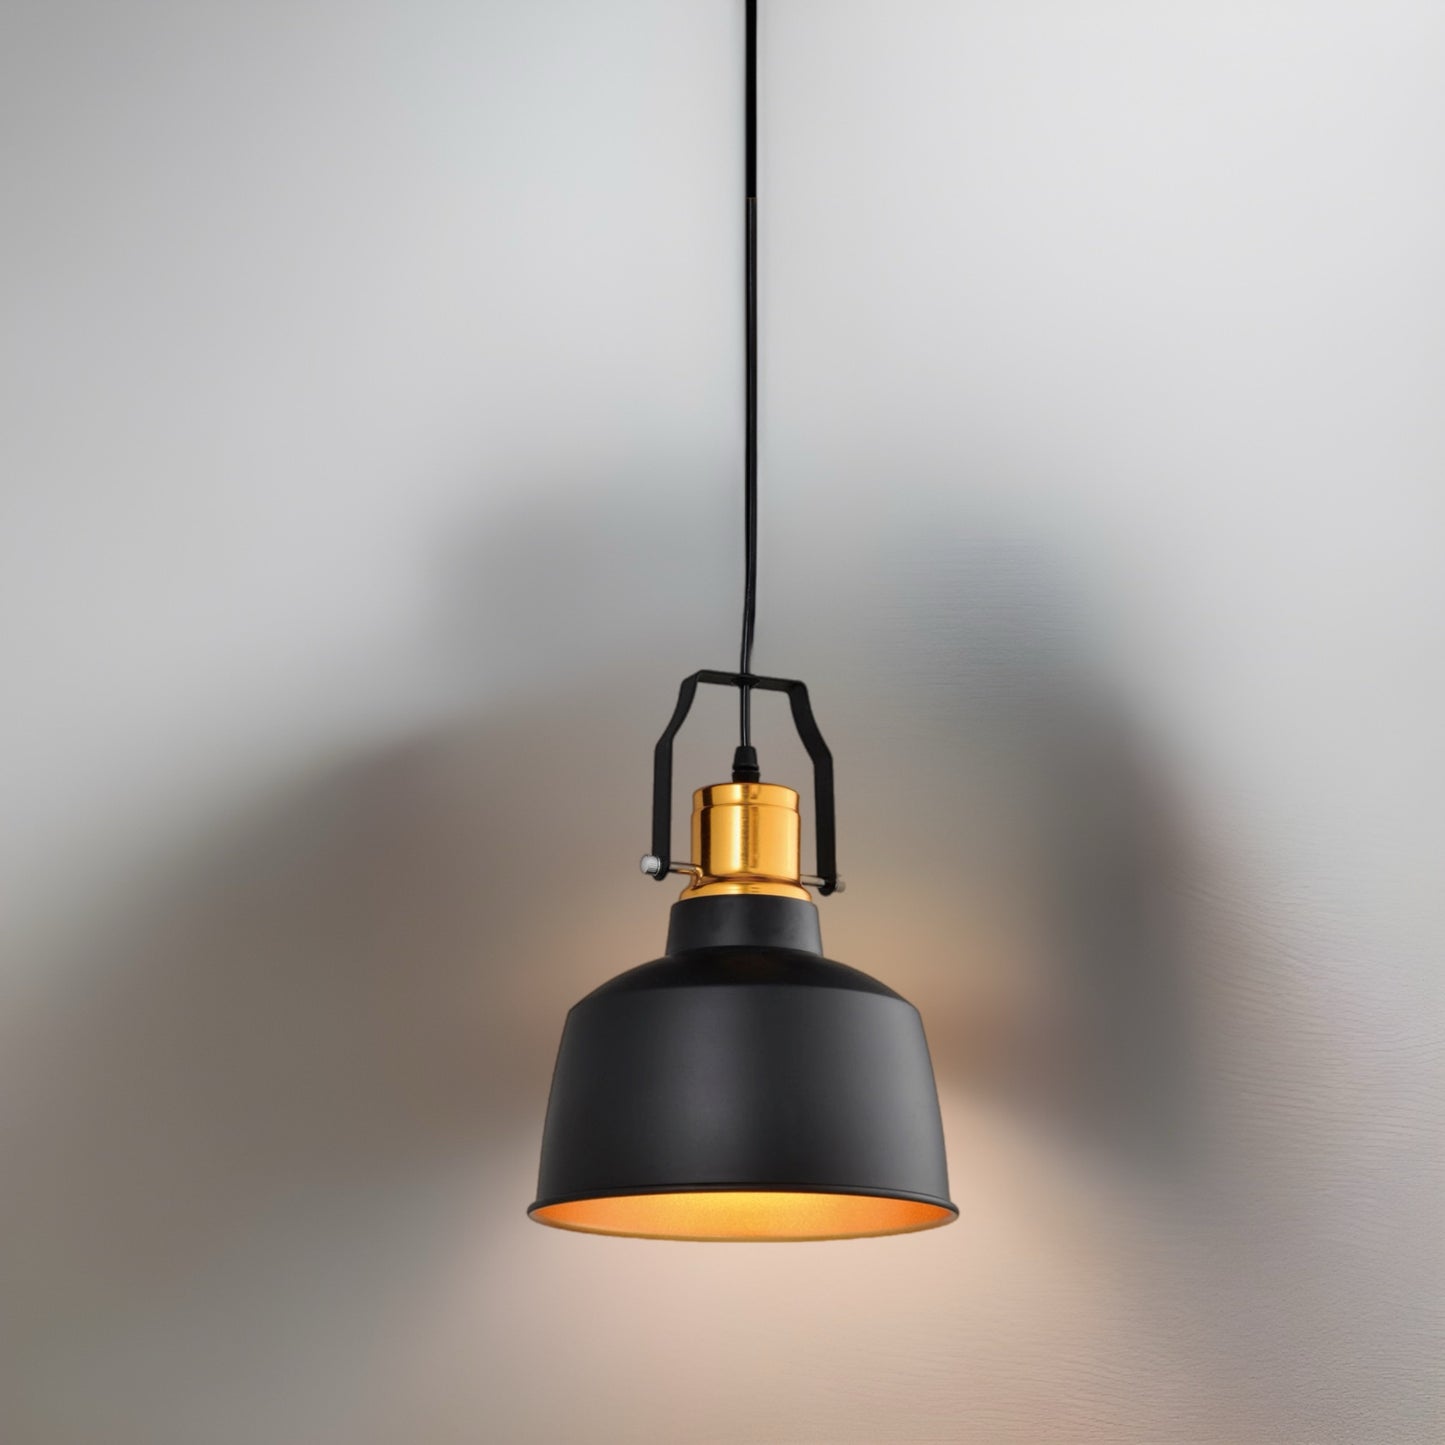 Black and gold lighting has been very popular in the lighting sector for some time. This is not only because the resulting contrast has such a harmonious appearance, but also because of the fantastic lighting effect that is produced by the golden inner surface of the lampshade.